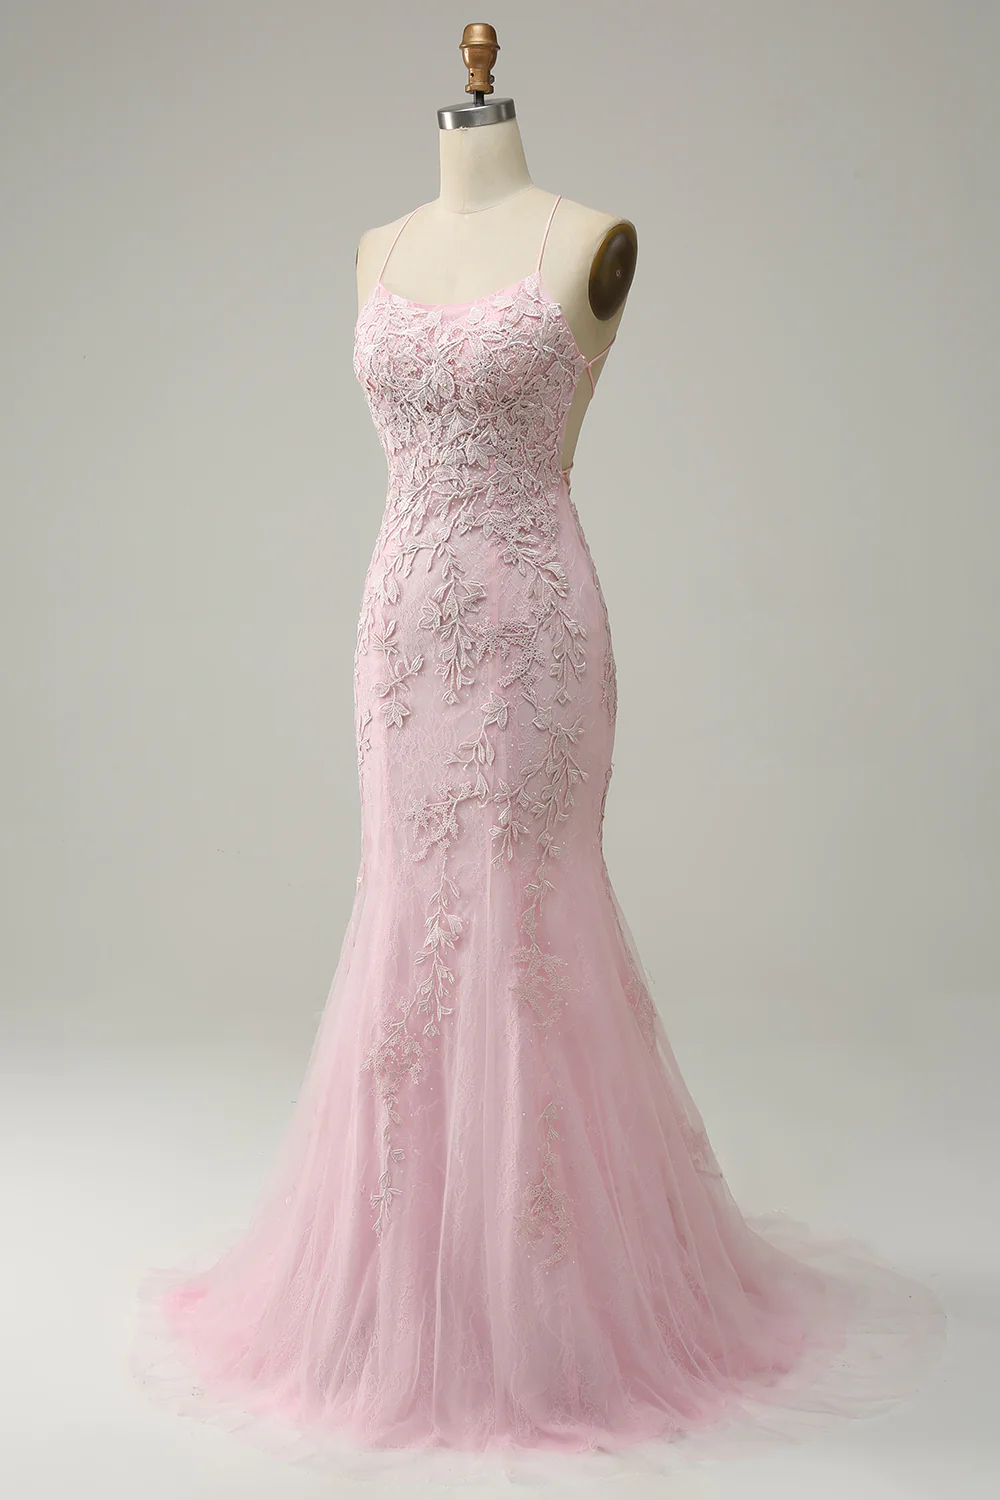 Mermaid Spaghetti Straps Light Pink Long Prom Dress with Appliques Y4466